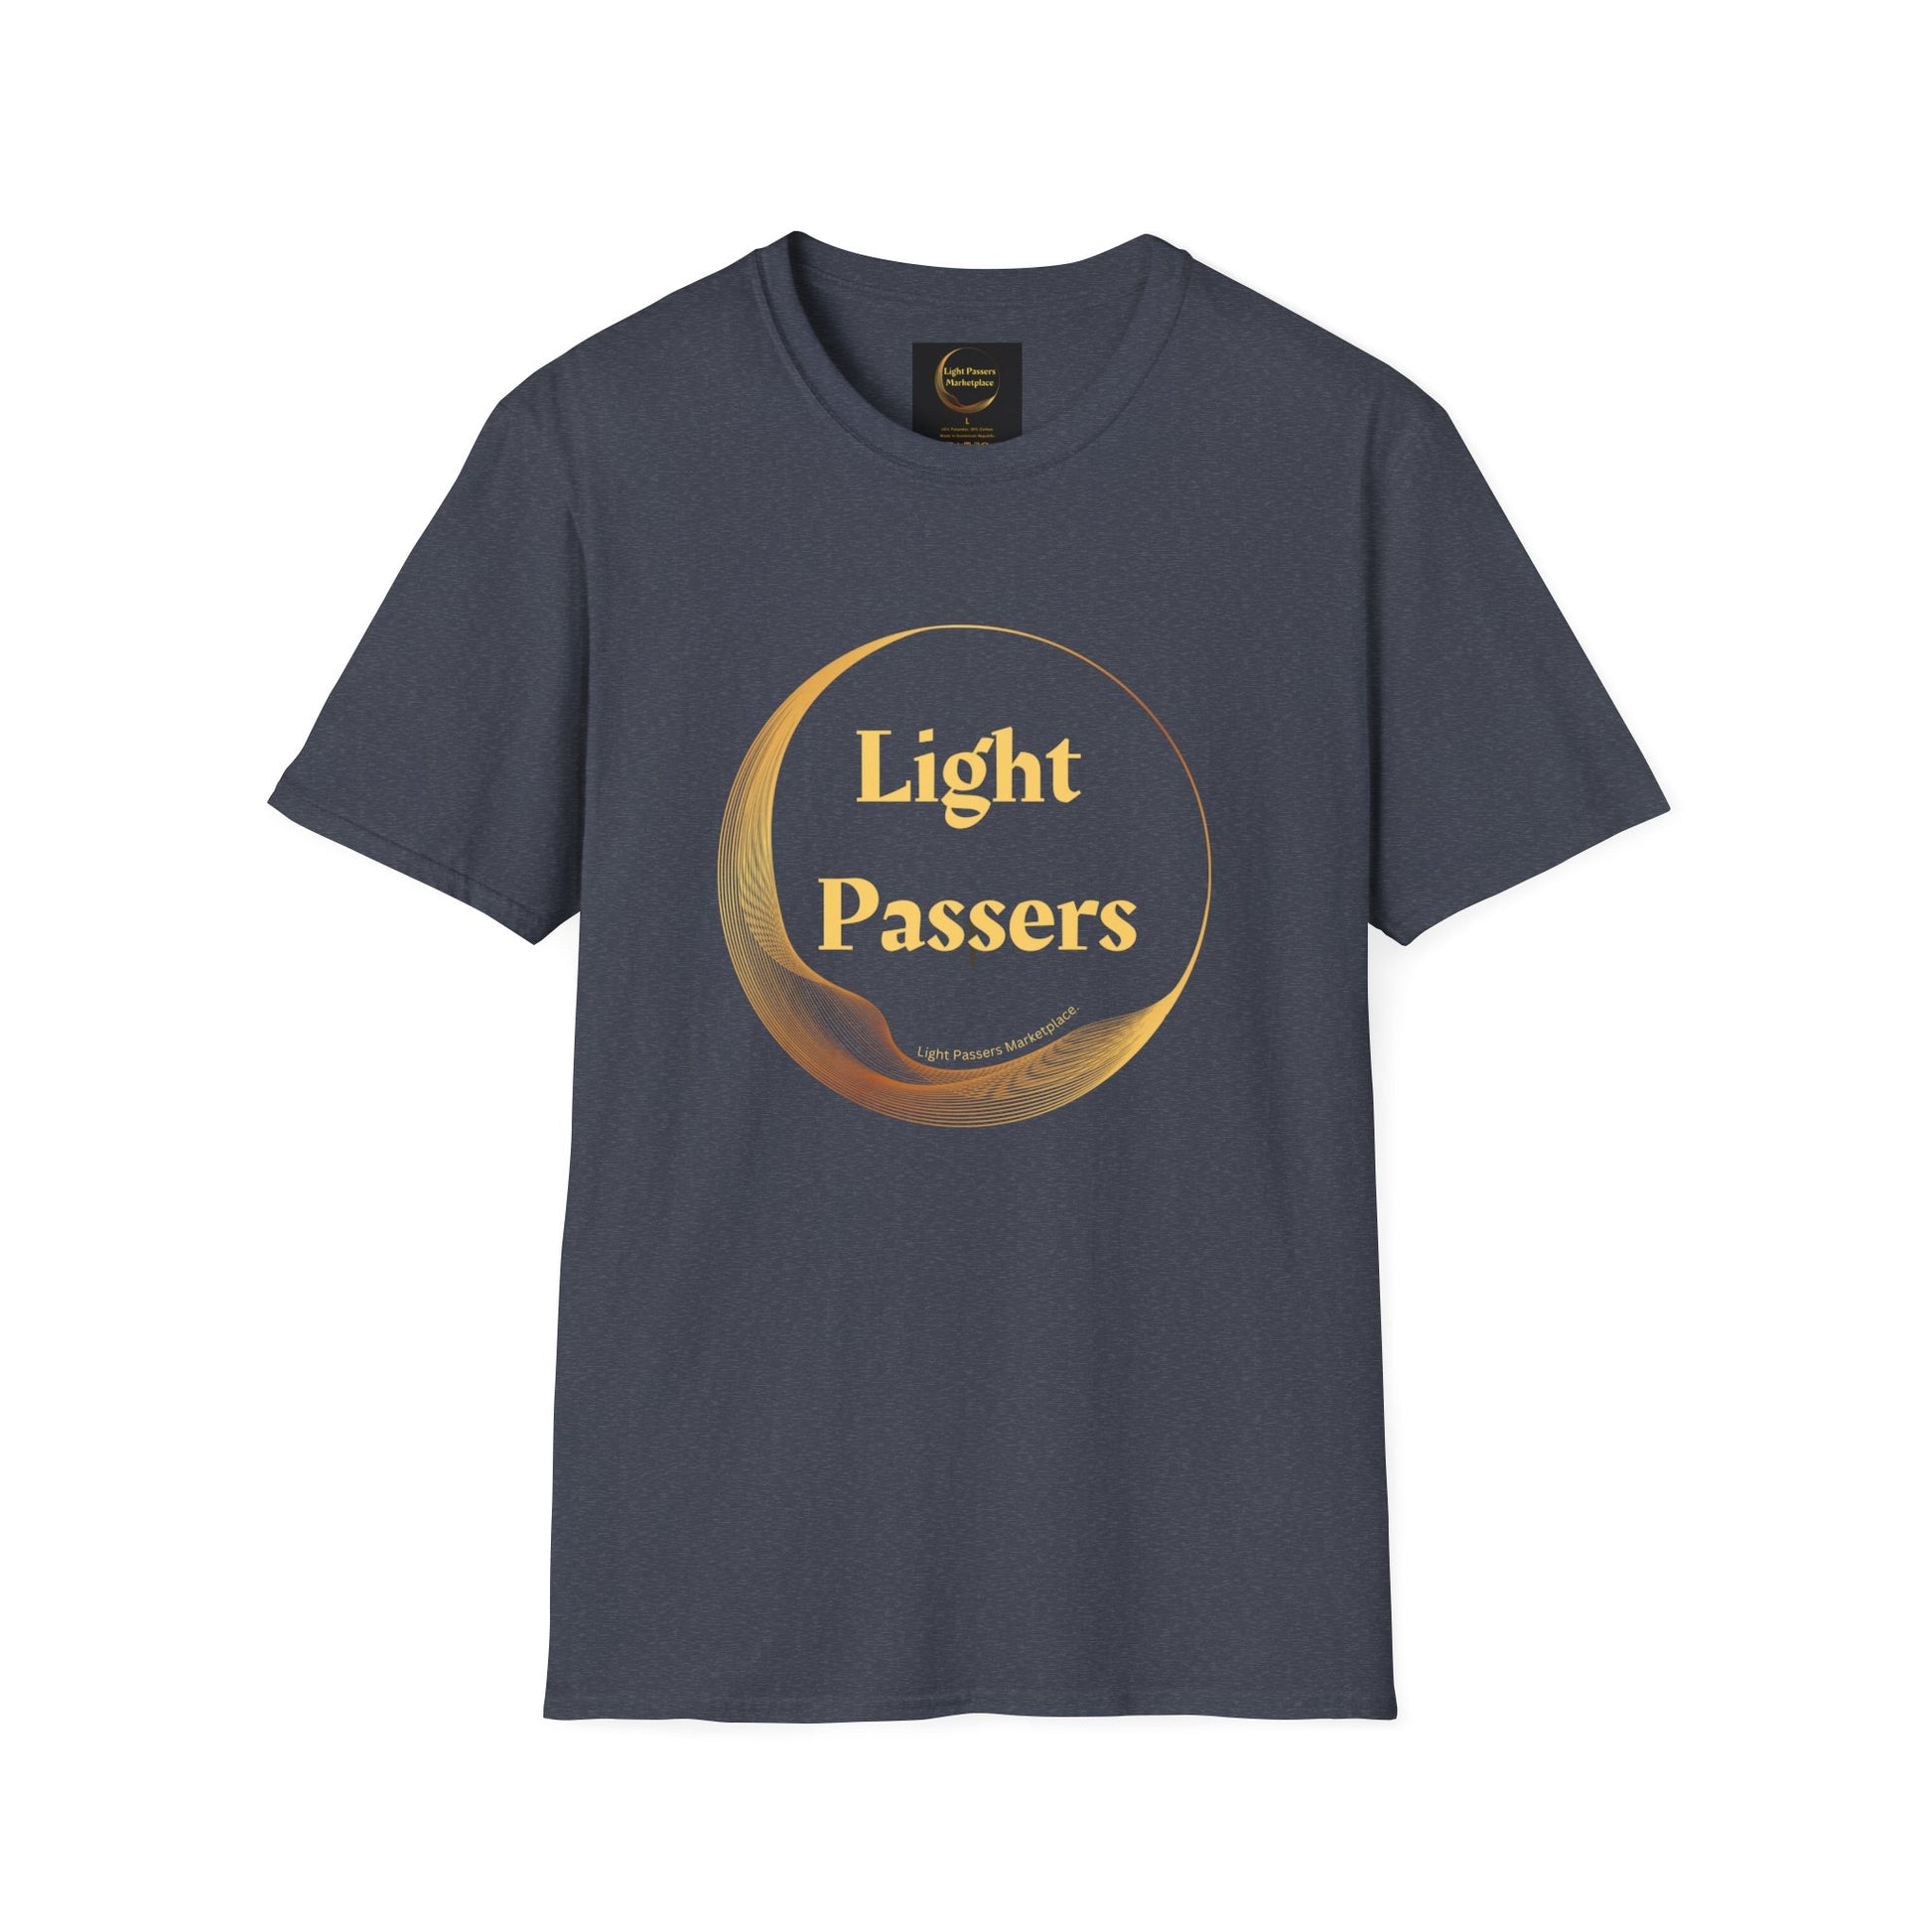 A close-up of a Light Passers Gold Logo Unisex T-shirt with a logo on it, showcasing smooth fabric for vivid printing, no side seams, and tape on shoulders for durability.